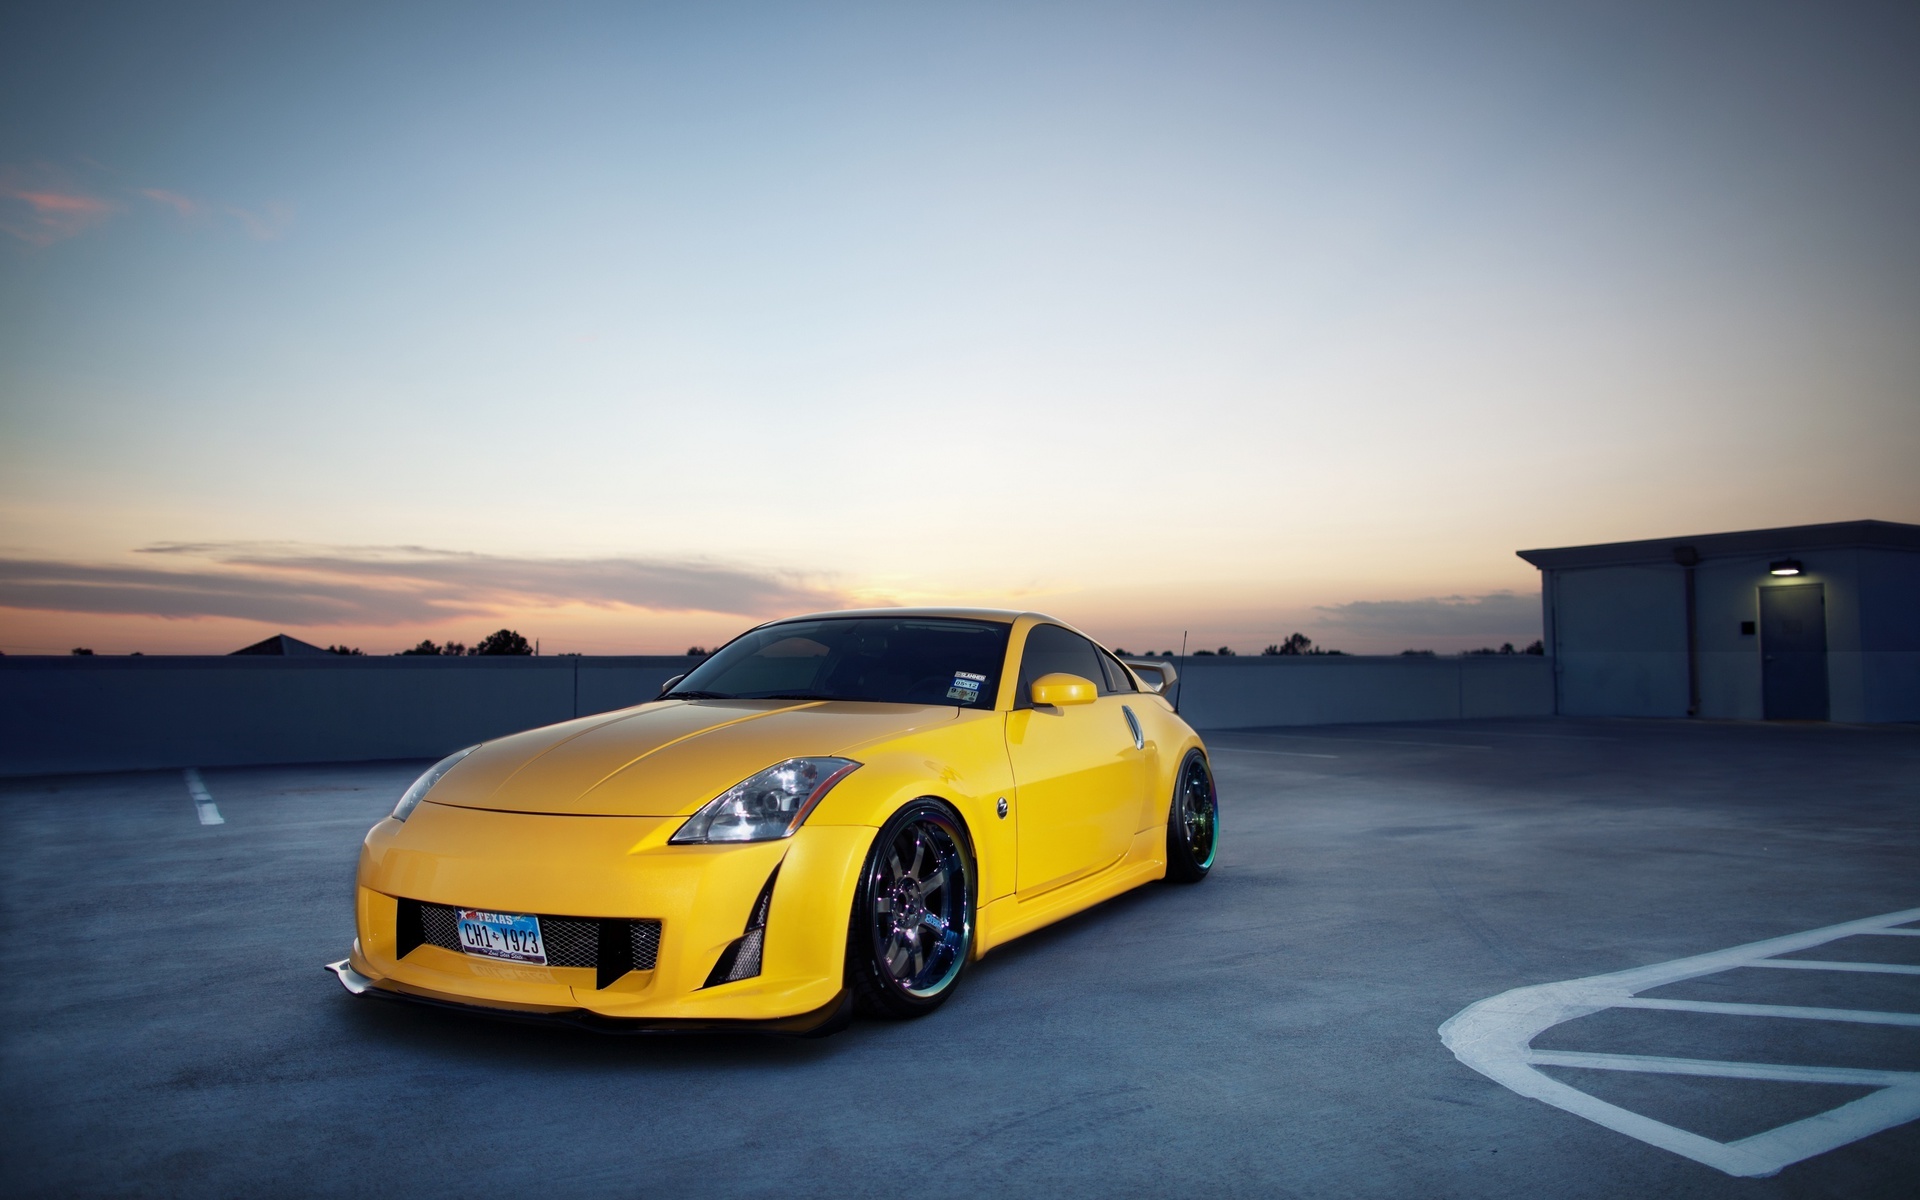 Auto, tuning, photo, nissan, wallpapers auto, tuning auto, city, nissan 350z, parking, cars, 350z